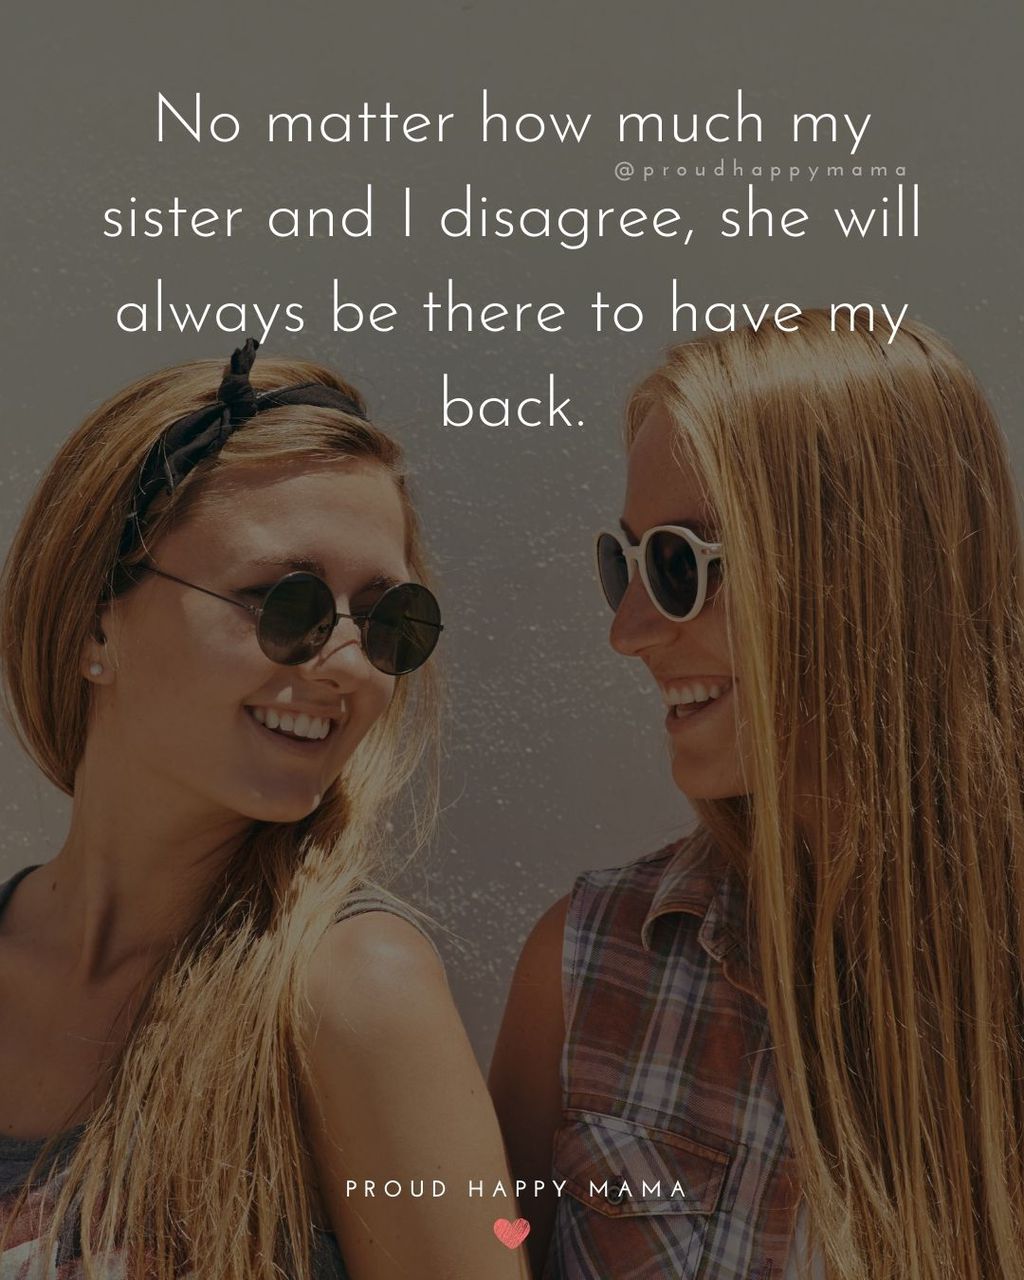 Sister Quote - No matter how much my sister and I disagree, she will always be there to have my back.